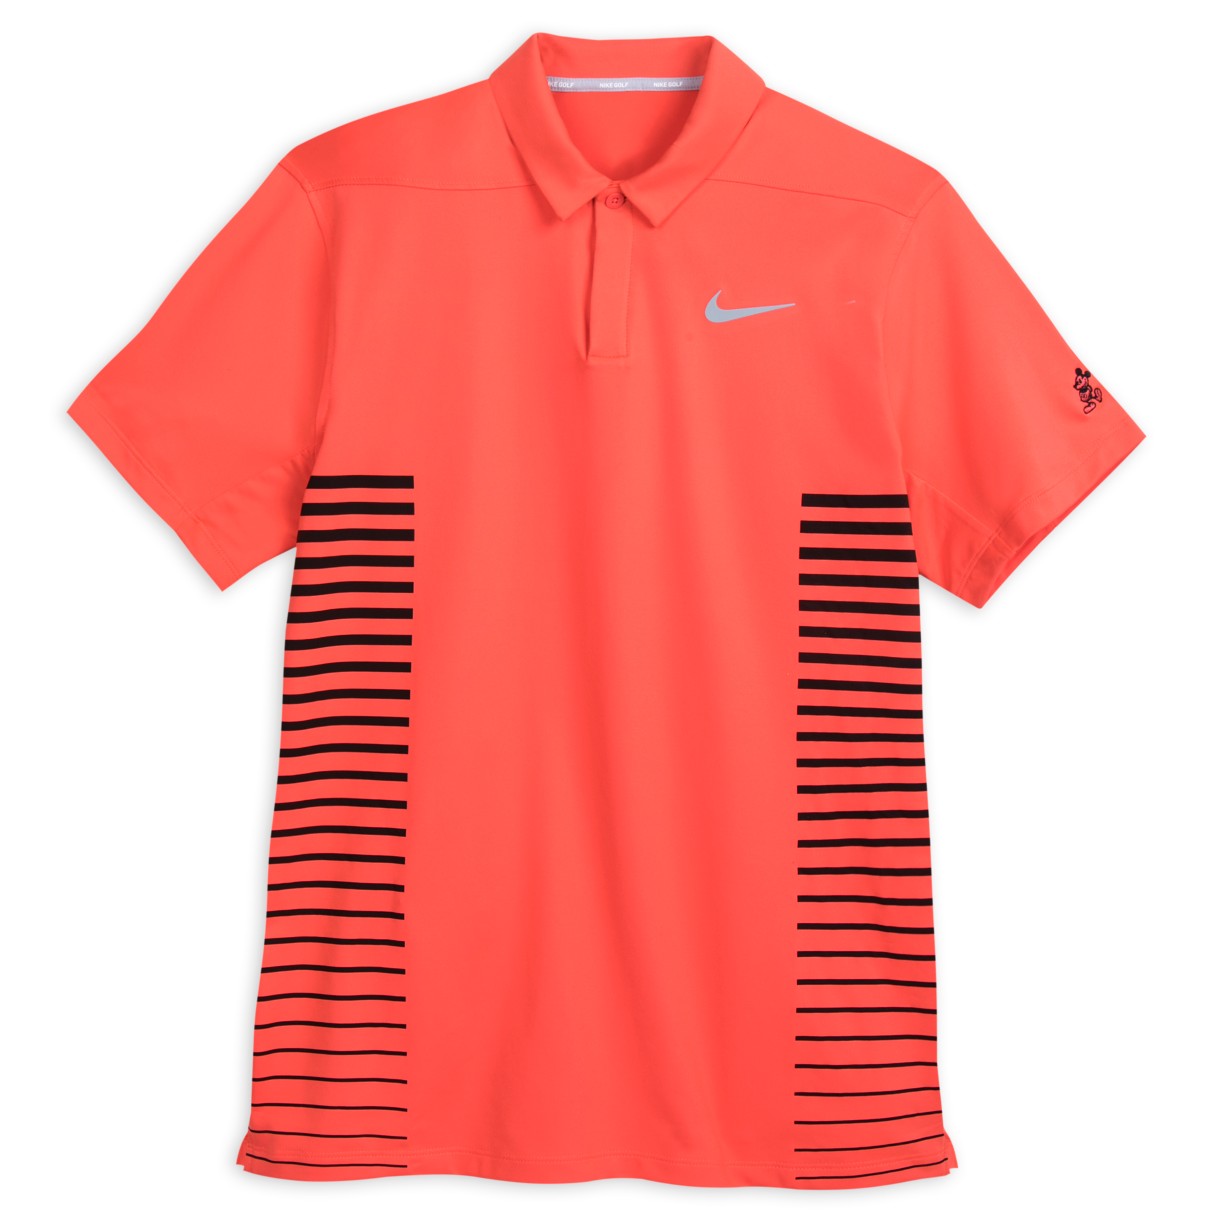 Mickey Mouse Performance Polo Shirt for Men by Nike Golf - Coral Stripe ...